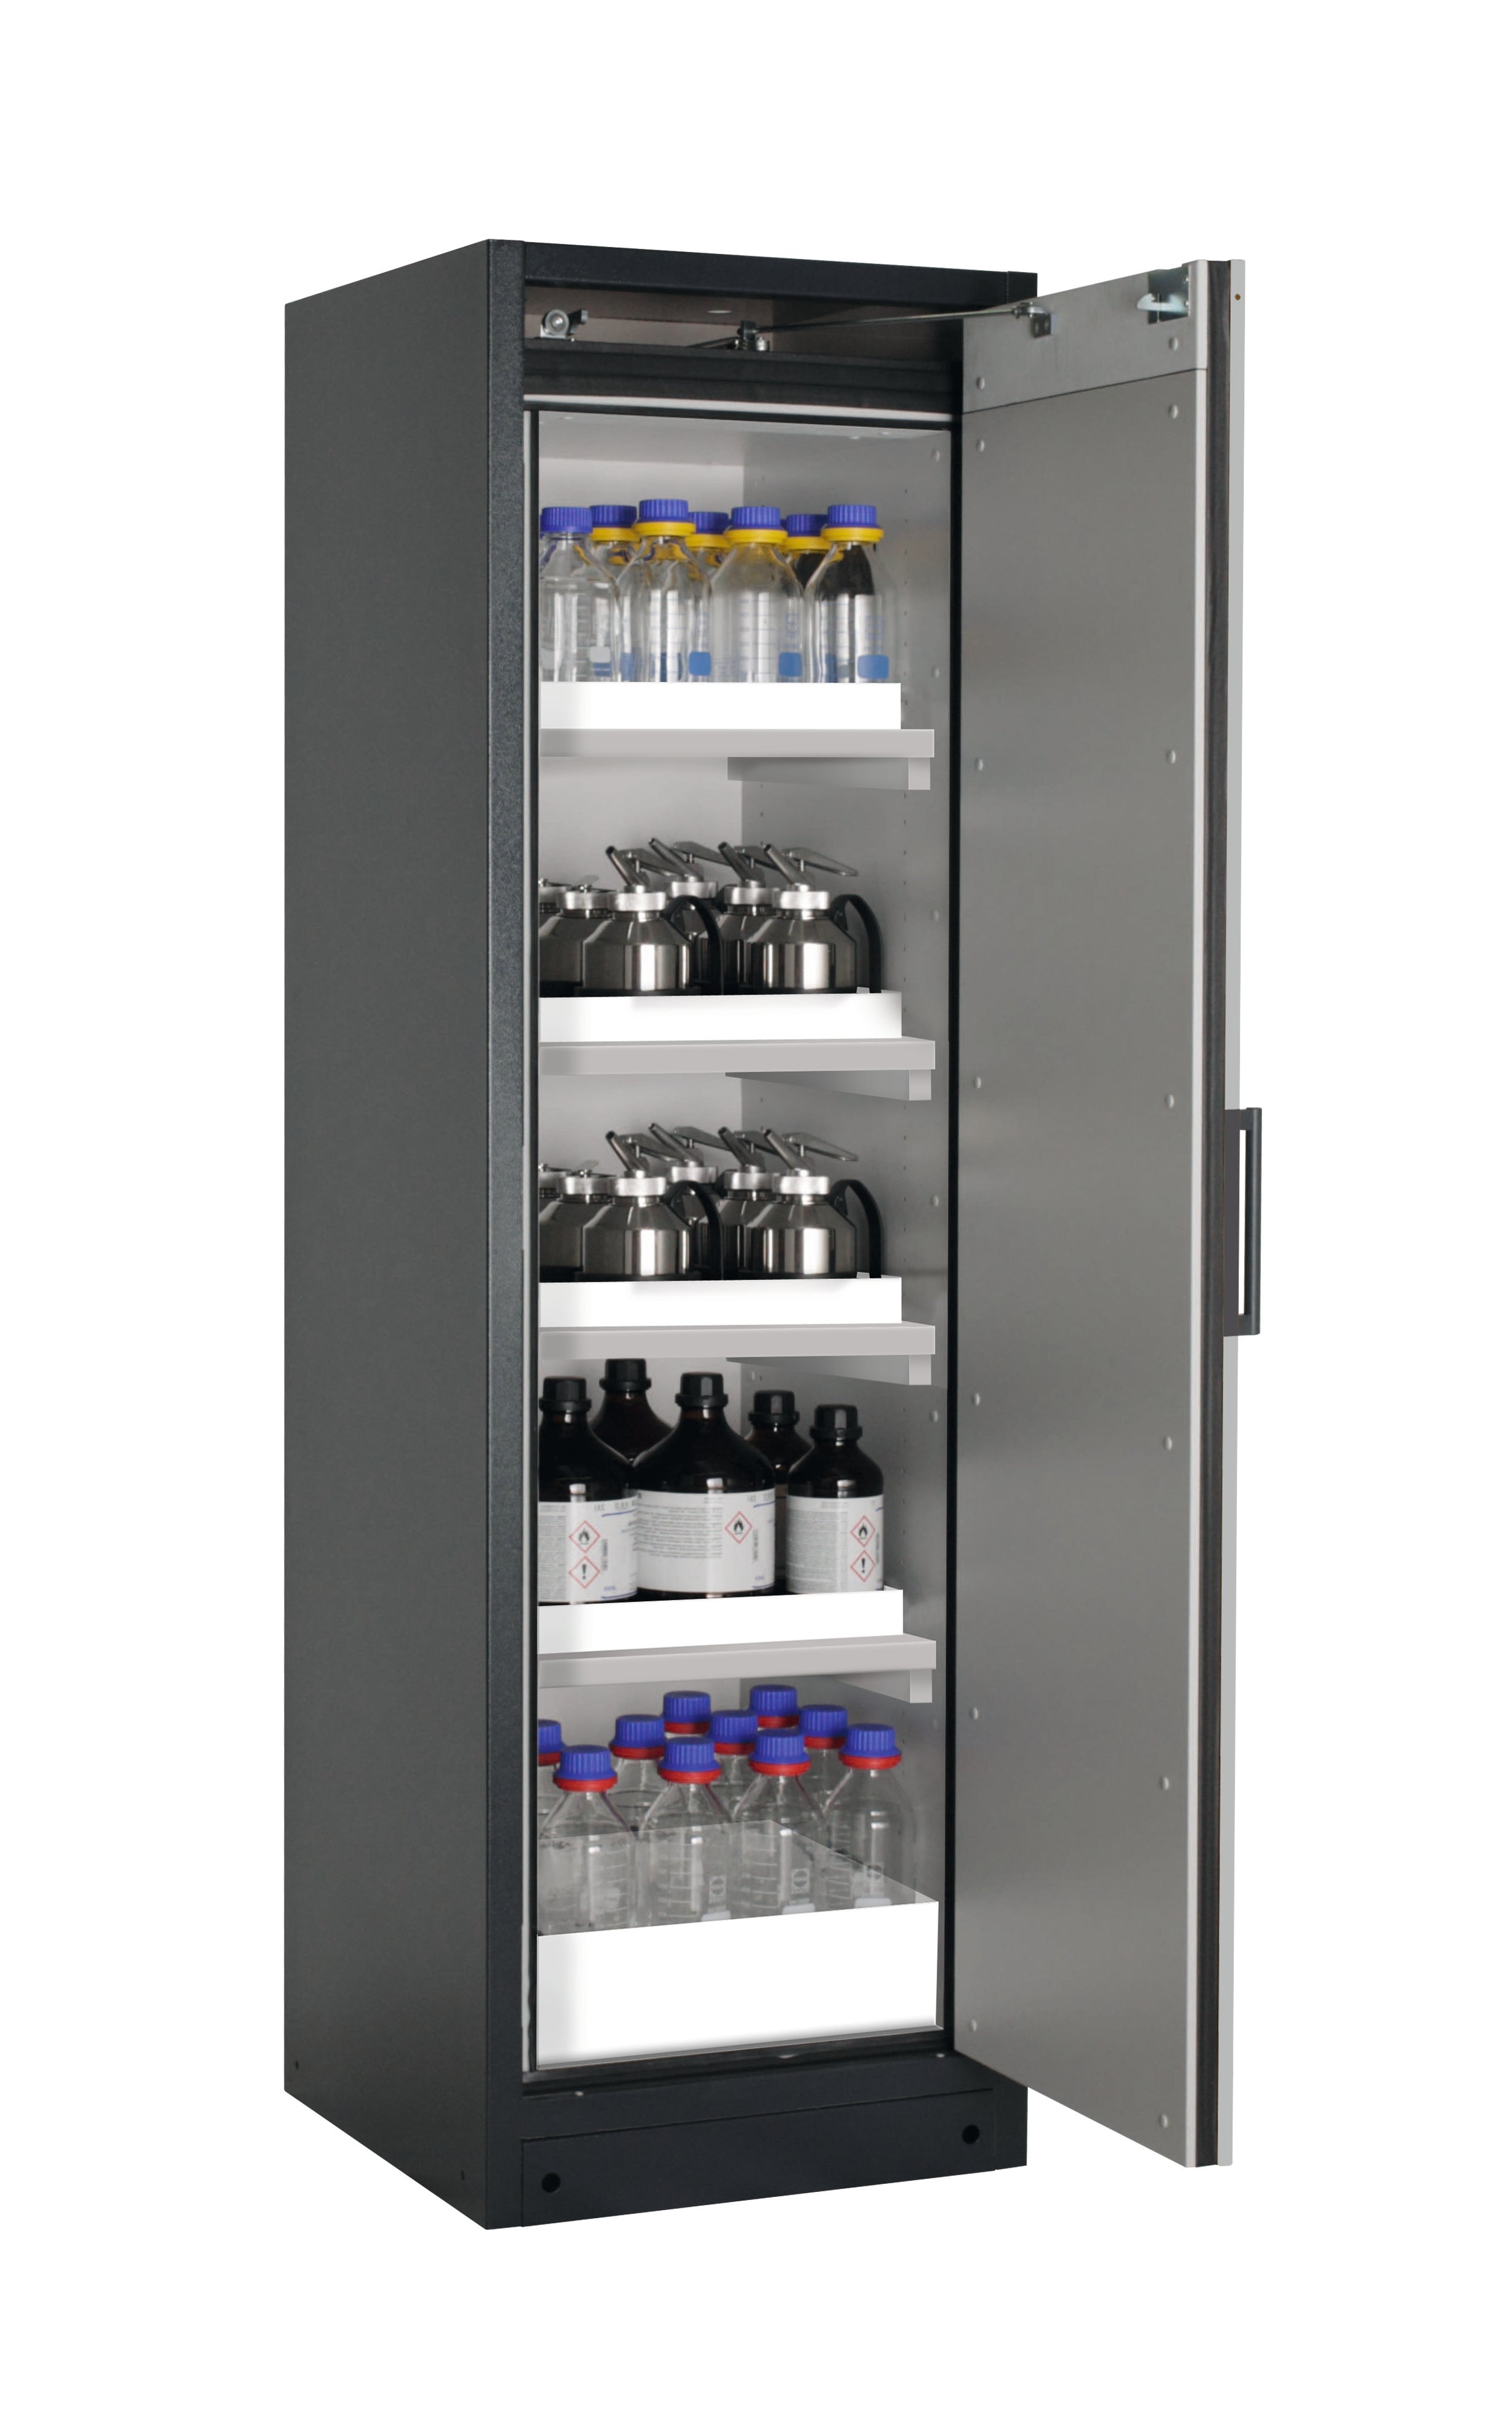 Type 90 safety storage cabinet Q-CLASSIC-90 model Q90.195.060.R in pure white RAL 9010 with 4x tray shelf (standard) (polypropylene),